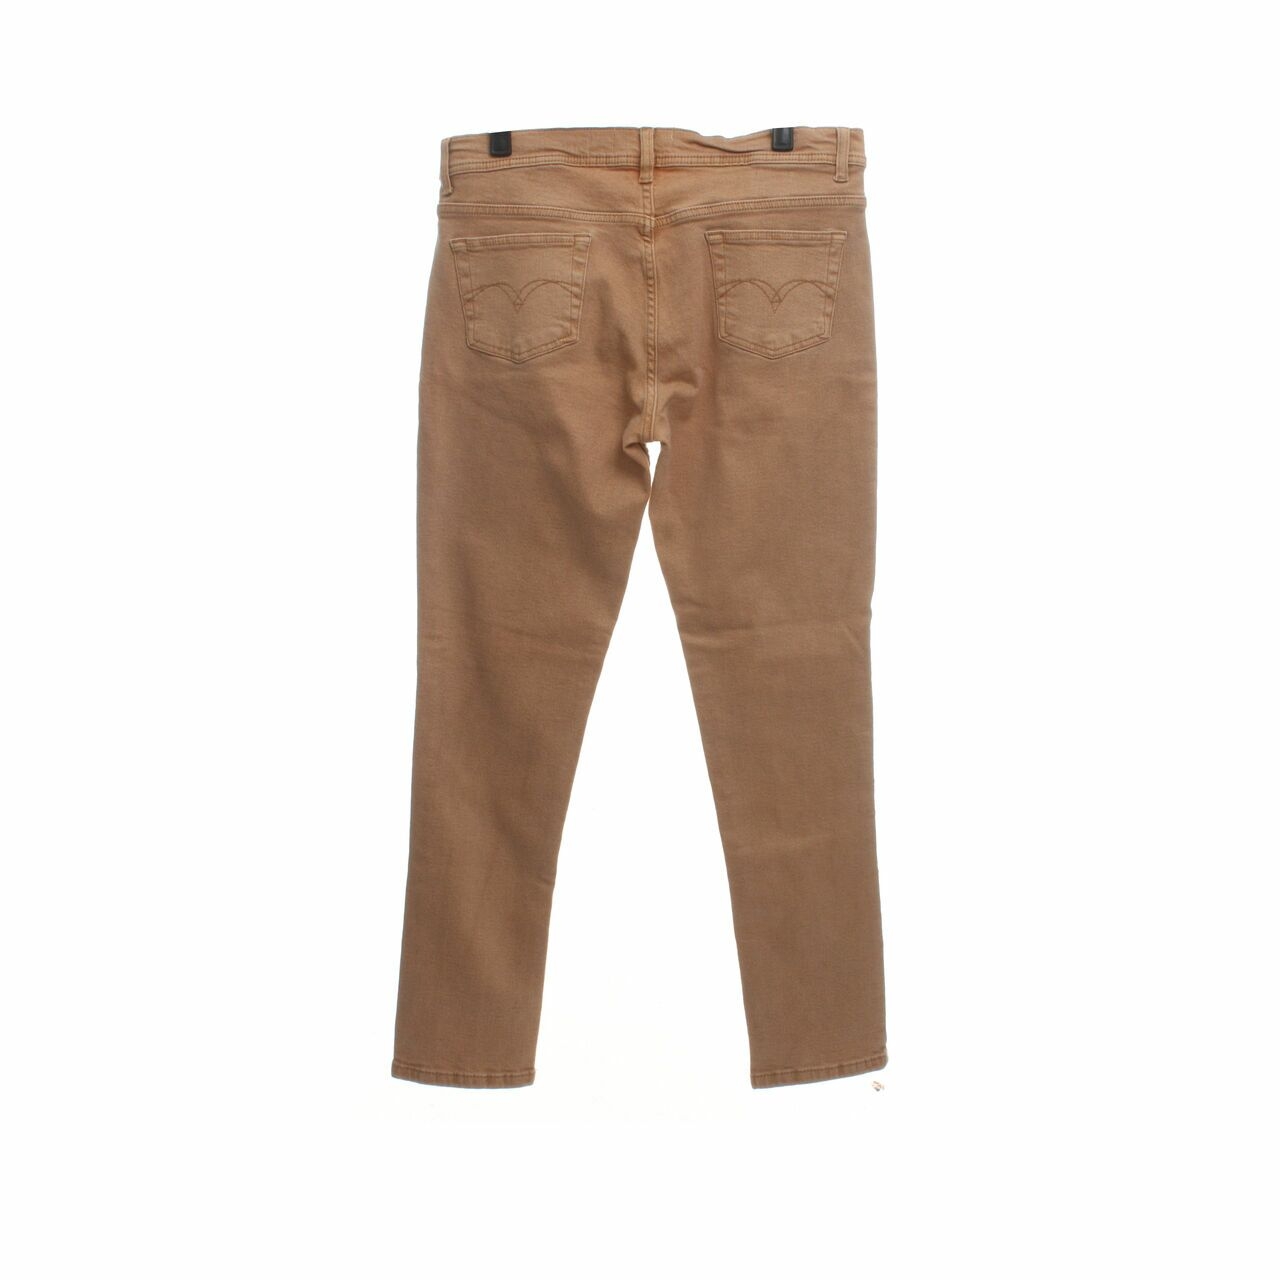 Connexion Camel Skinny Jeans